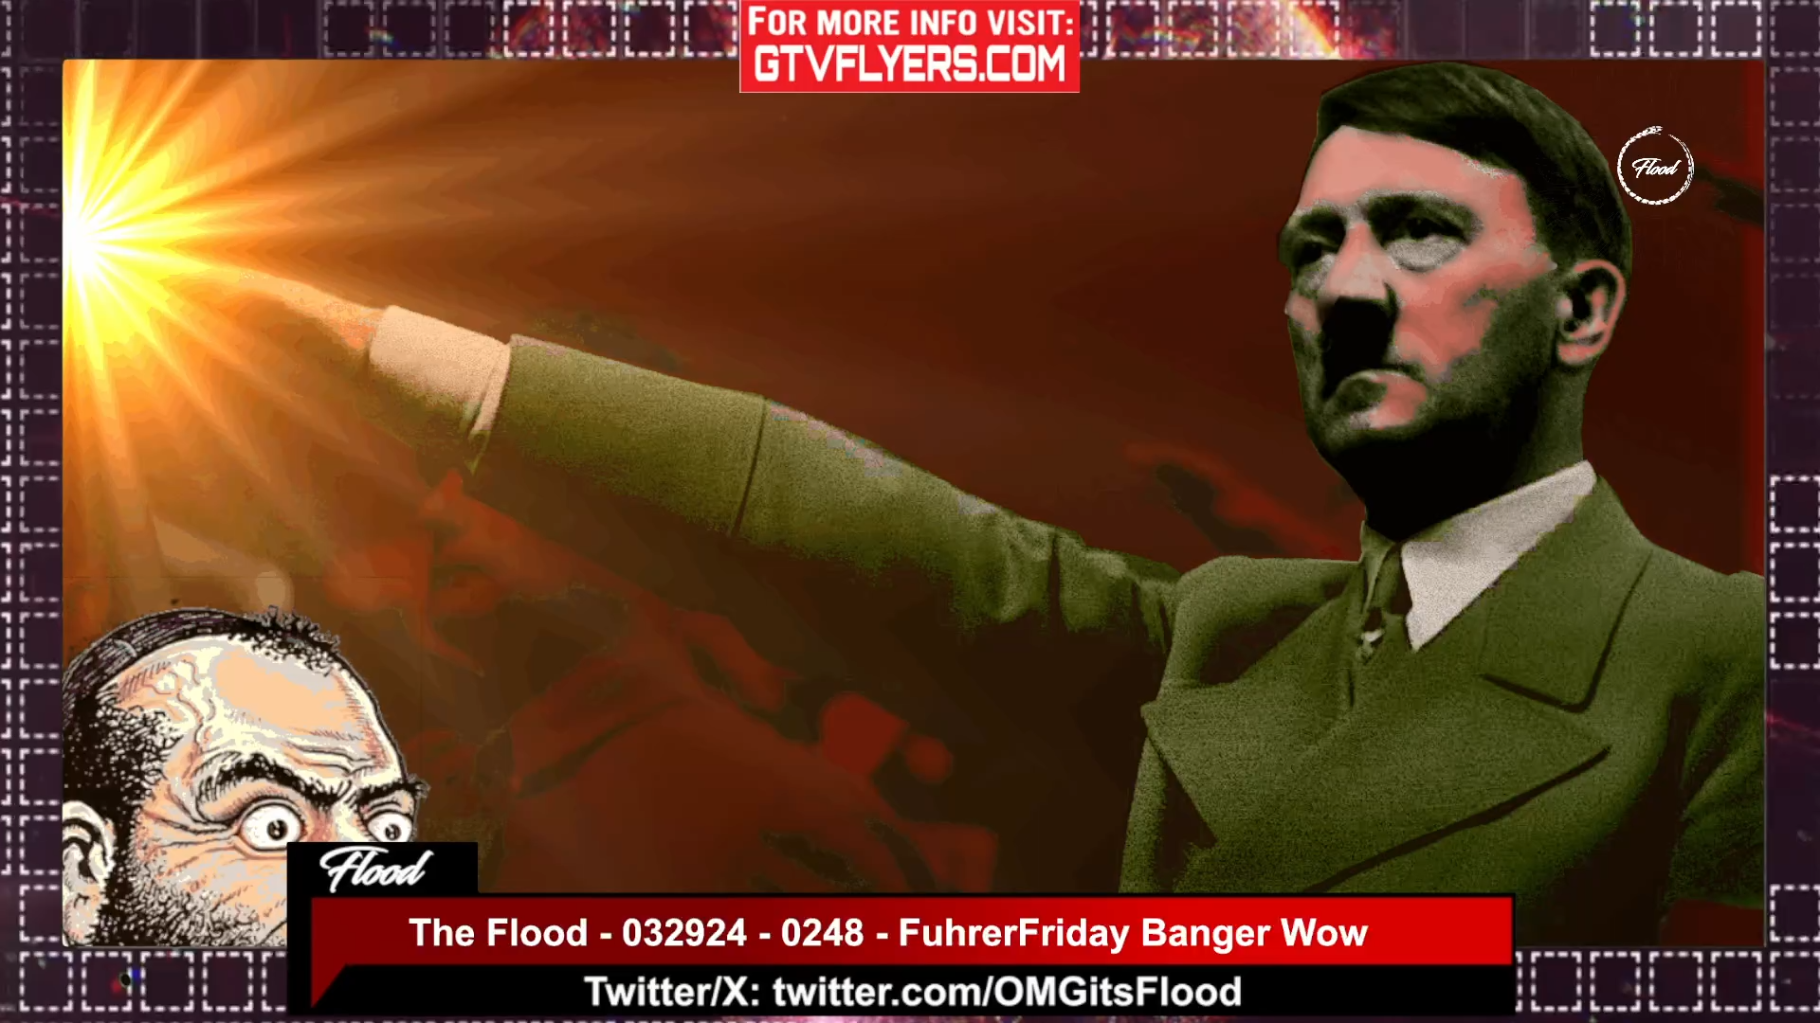 Live in 27 minutes The Flood - 032924 - 0248 - FuhrerFriday Banger Wow